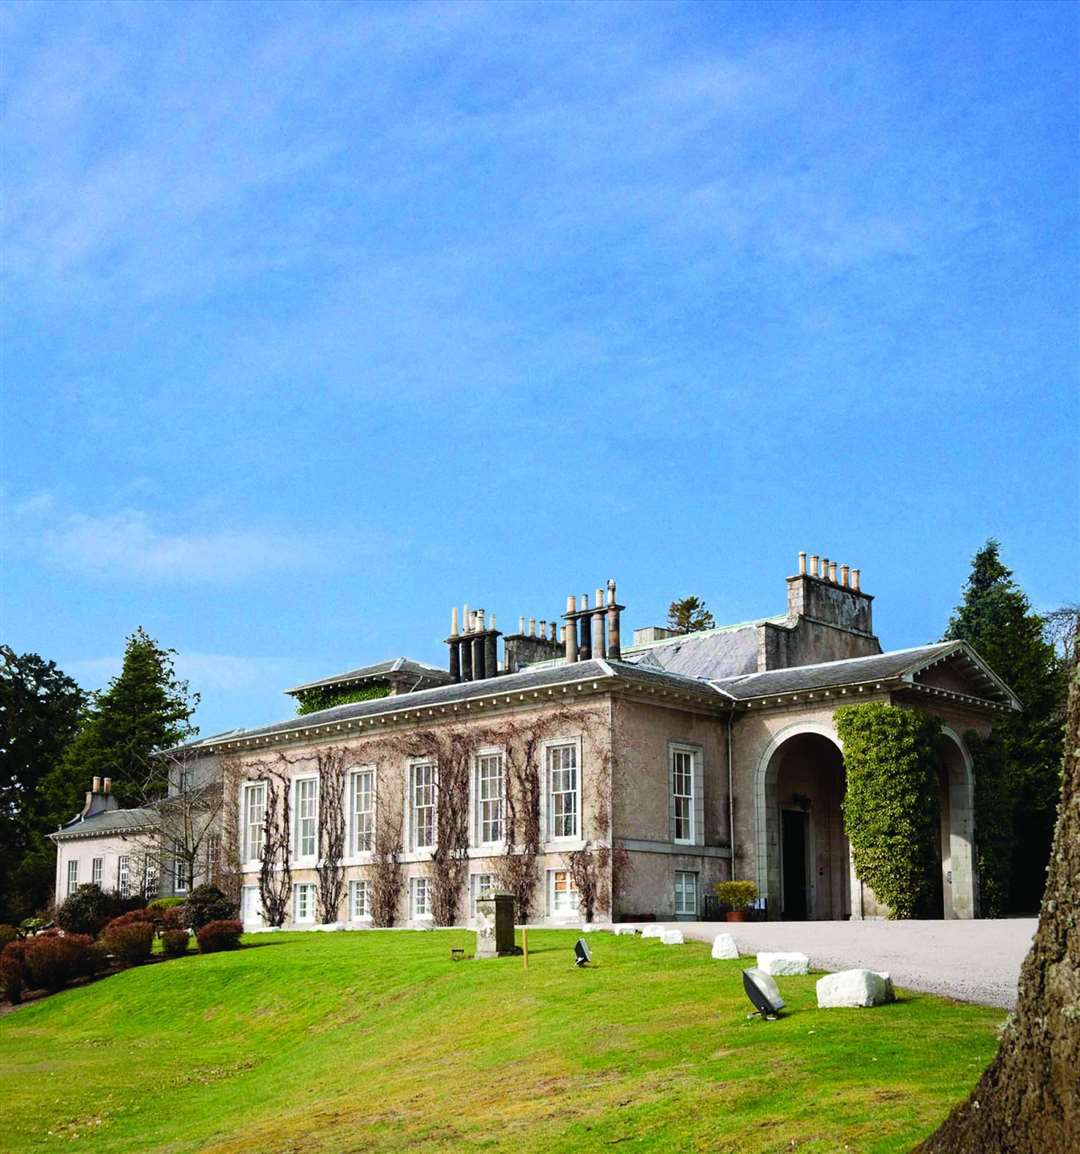 Thainstone House will offer an exclusive weekend use for NHS staff as a thank you from the owners.